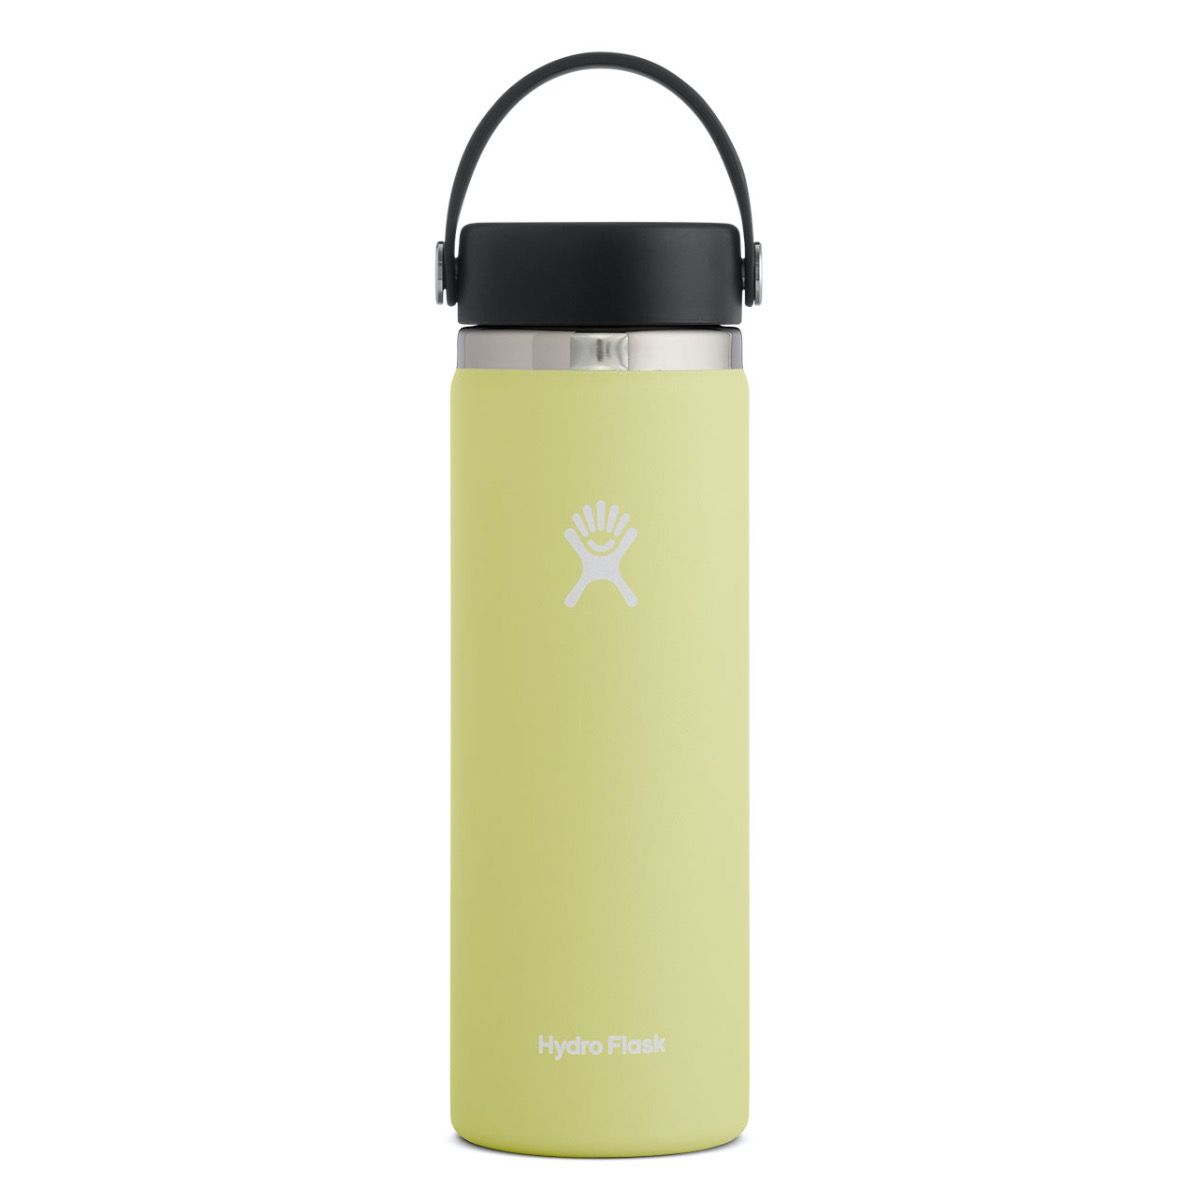 Hydro Flask 20 oz Wide Mouth Bottle Seagrass